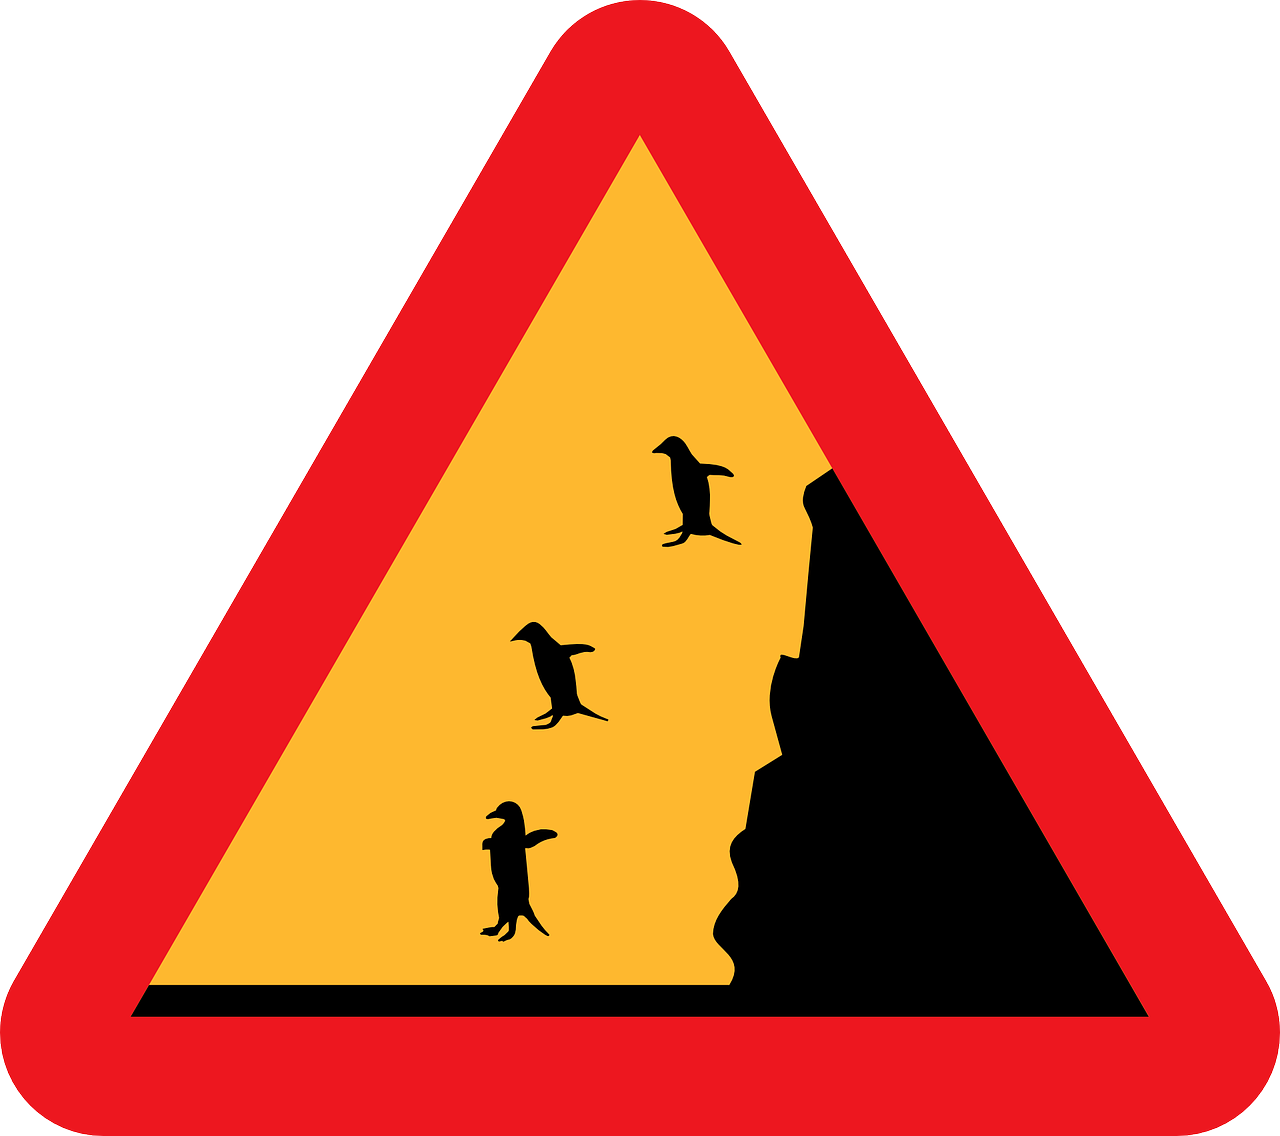 a sign warning of birds flying over a cliff, a cartoon, figuration libre, pingu, in triangular formation, ideas, narrow passage